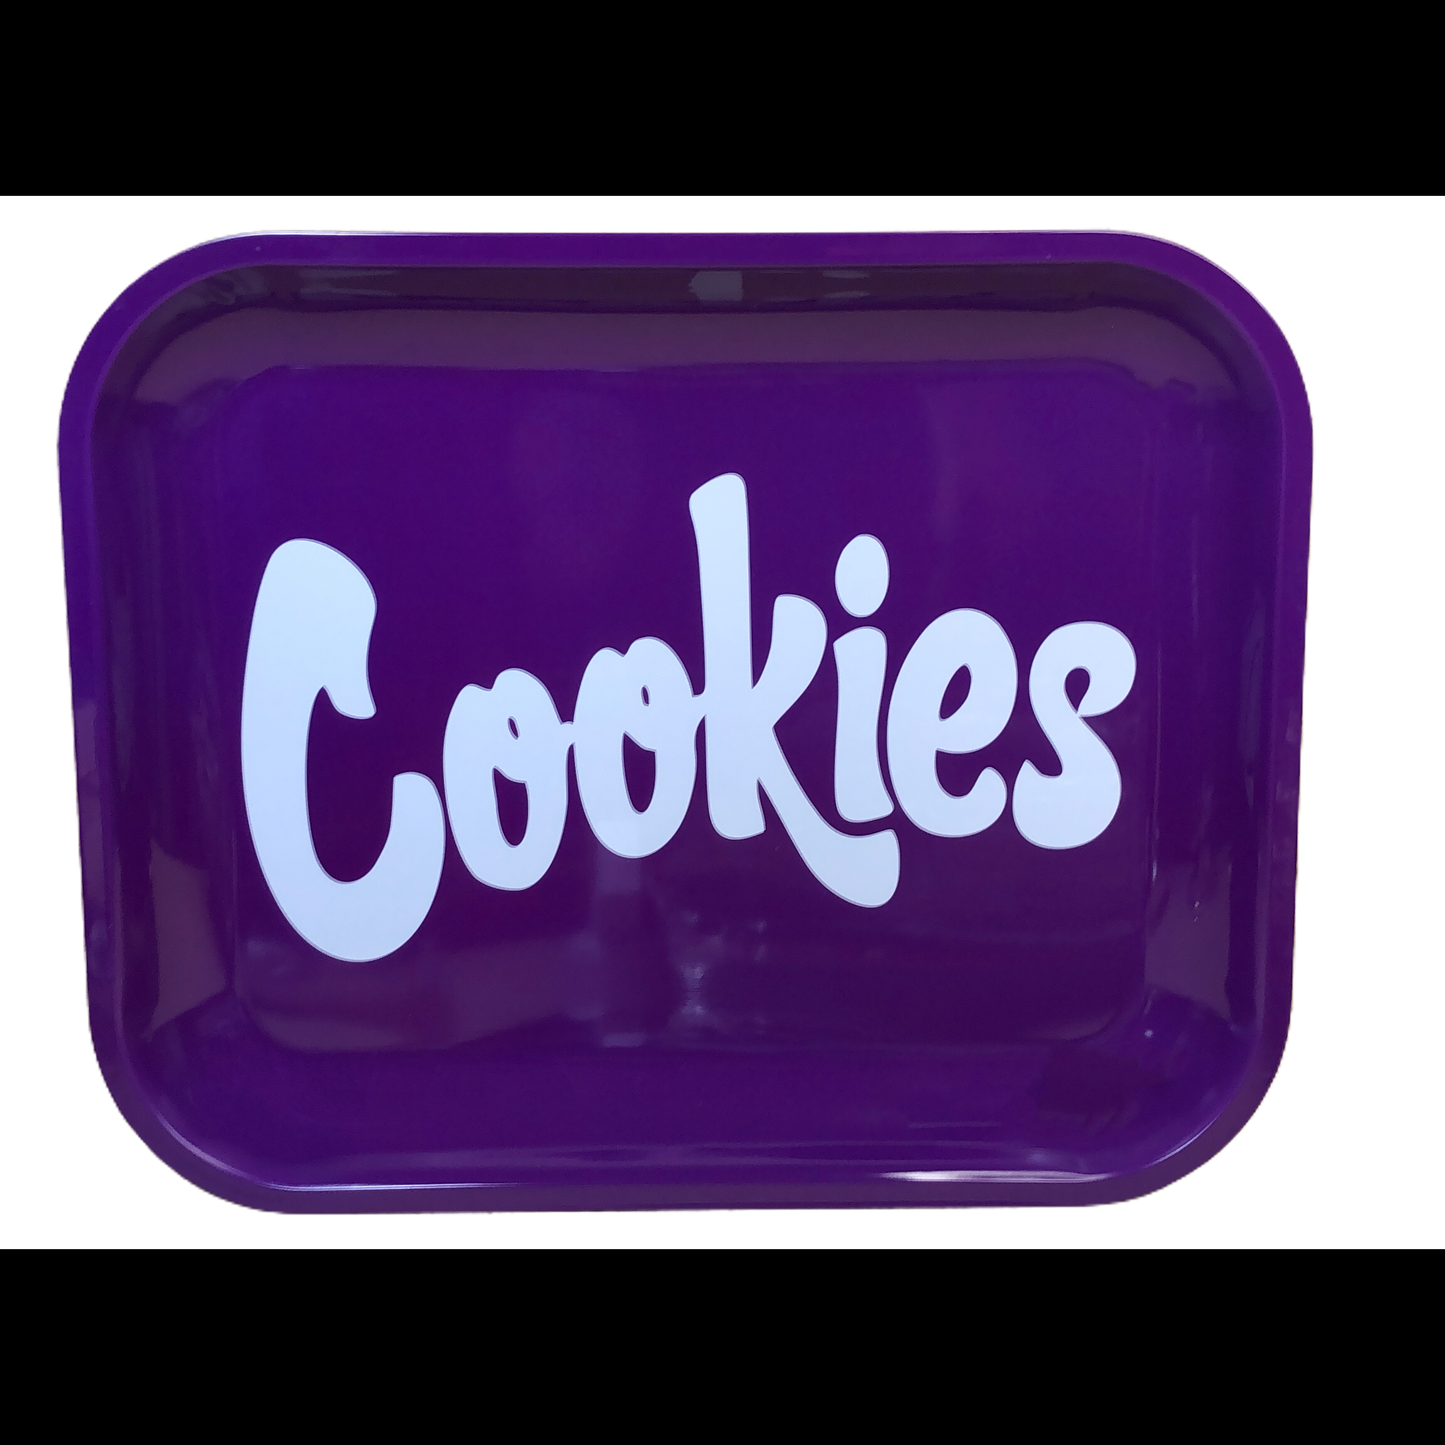 Cookies Graphic Rolling Tray - Purple